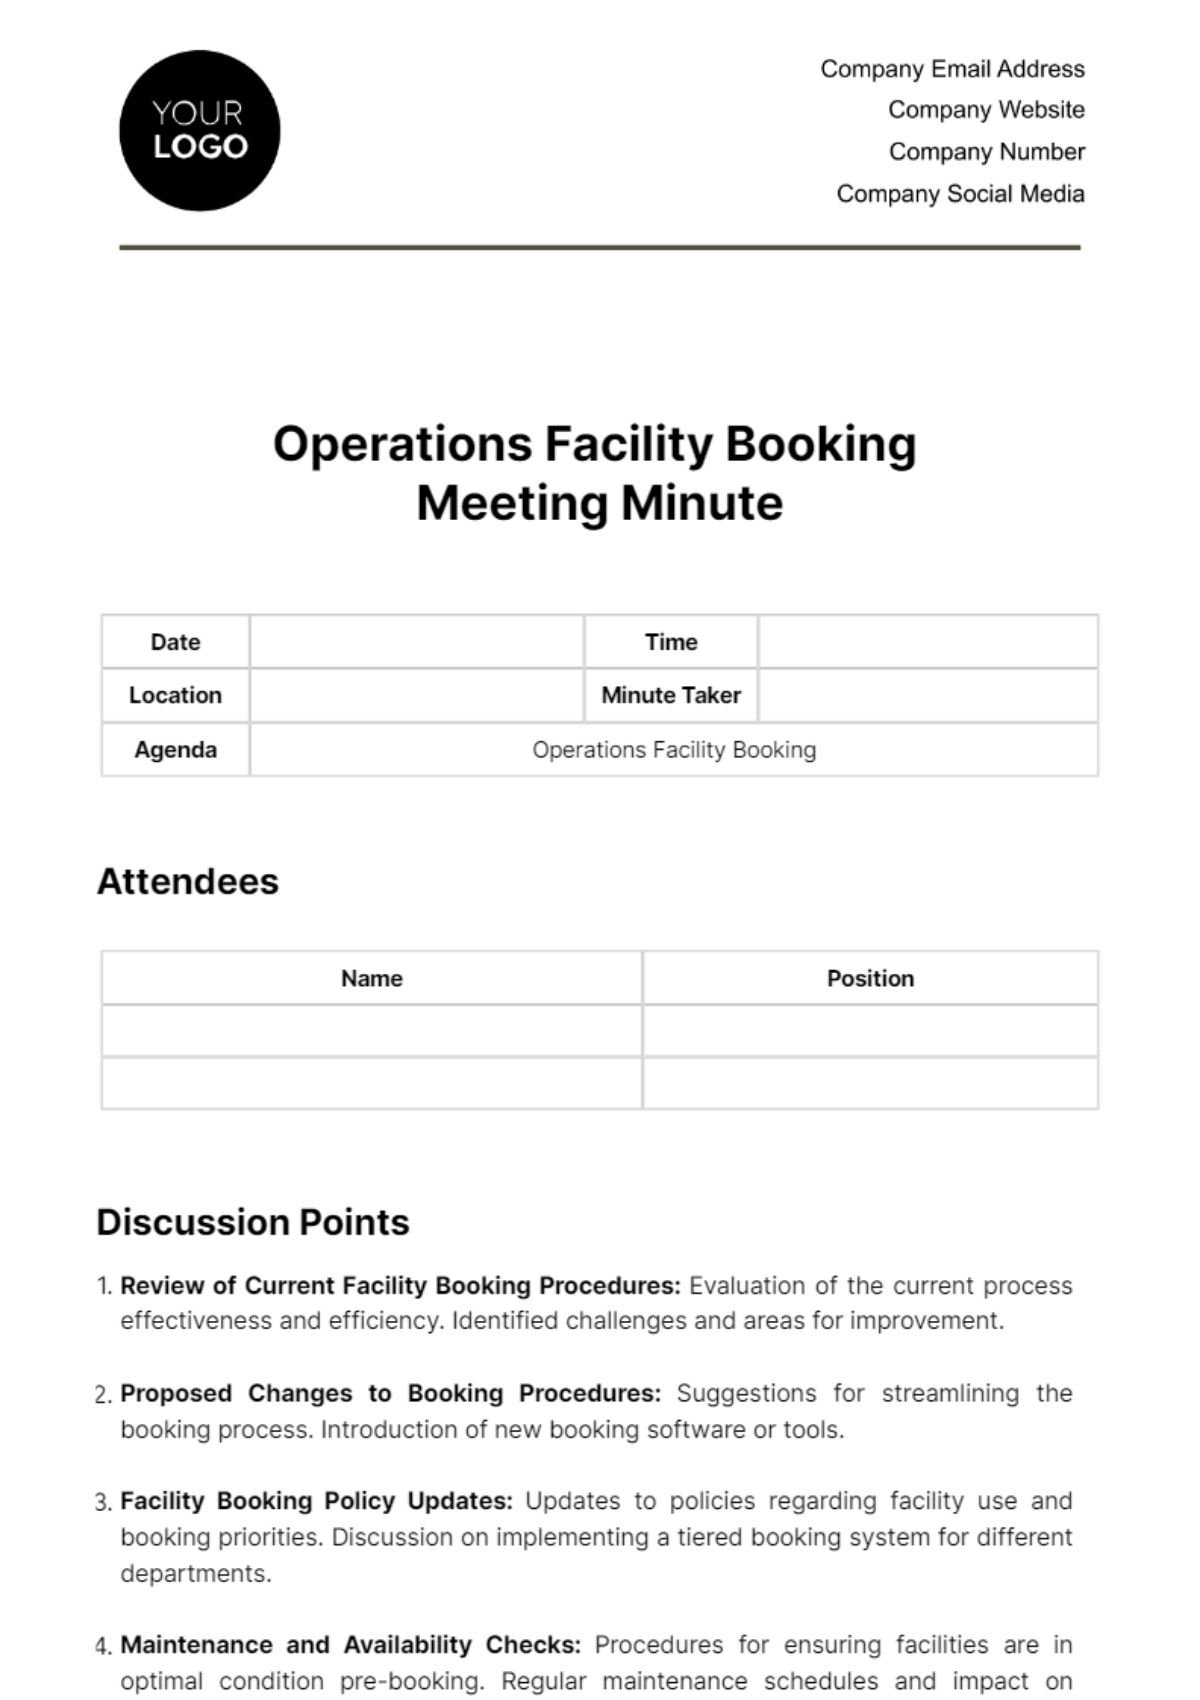 Operations Facility Booking Meeting Minute Template